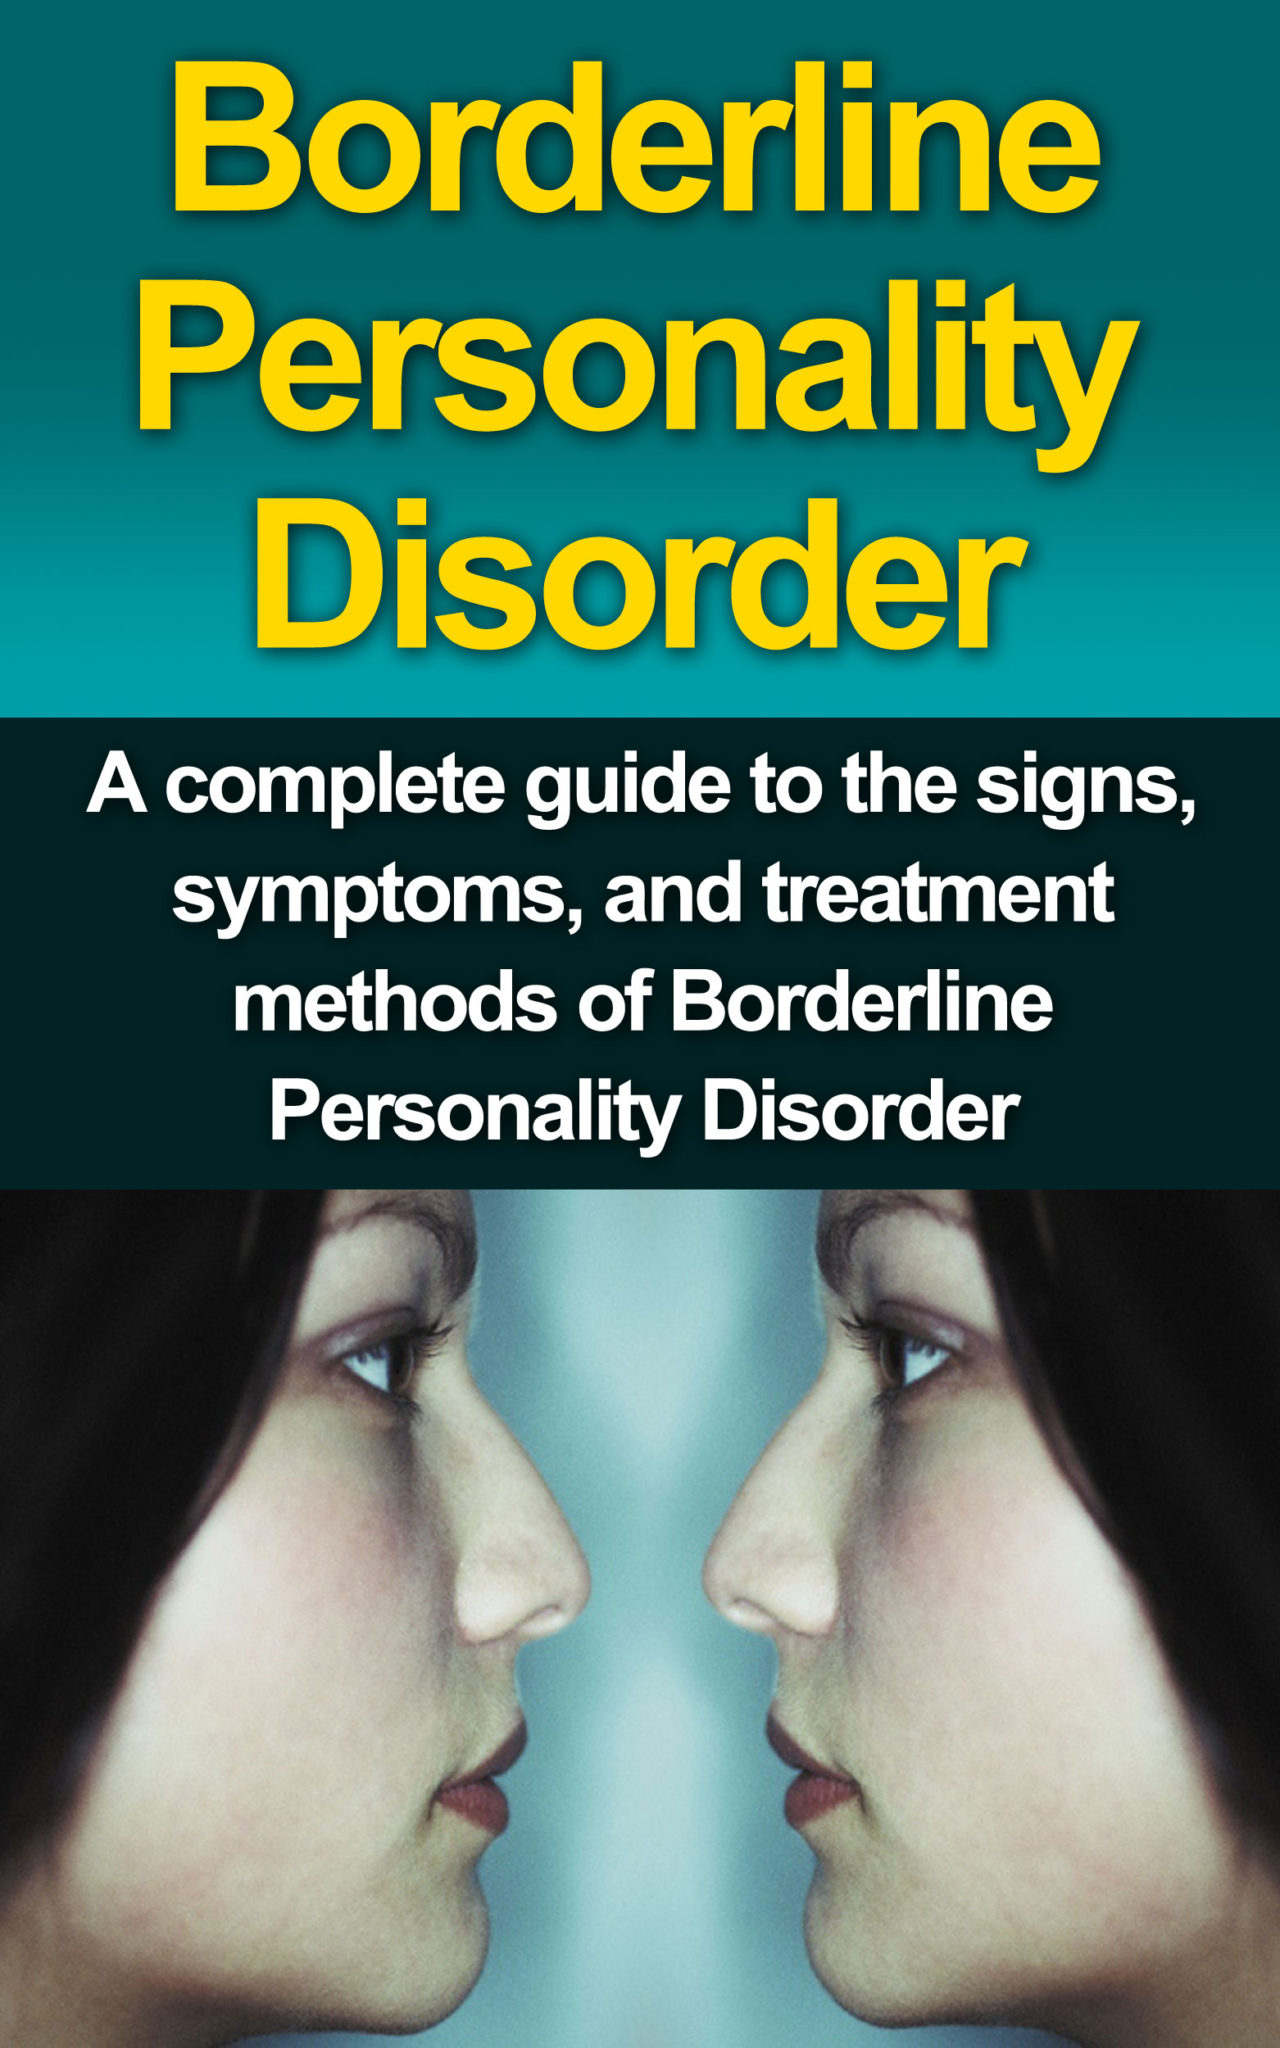 FREE: Borderline Personality Disorder: A Complete Guide to the Signs, Symptoms, and Treatment Methods of Borderline Personality Disorder by Alyssa Stone